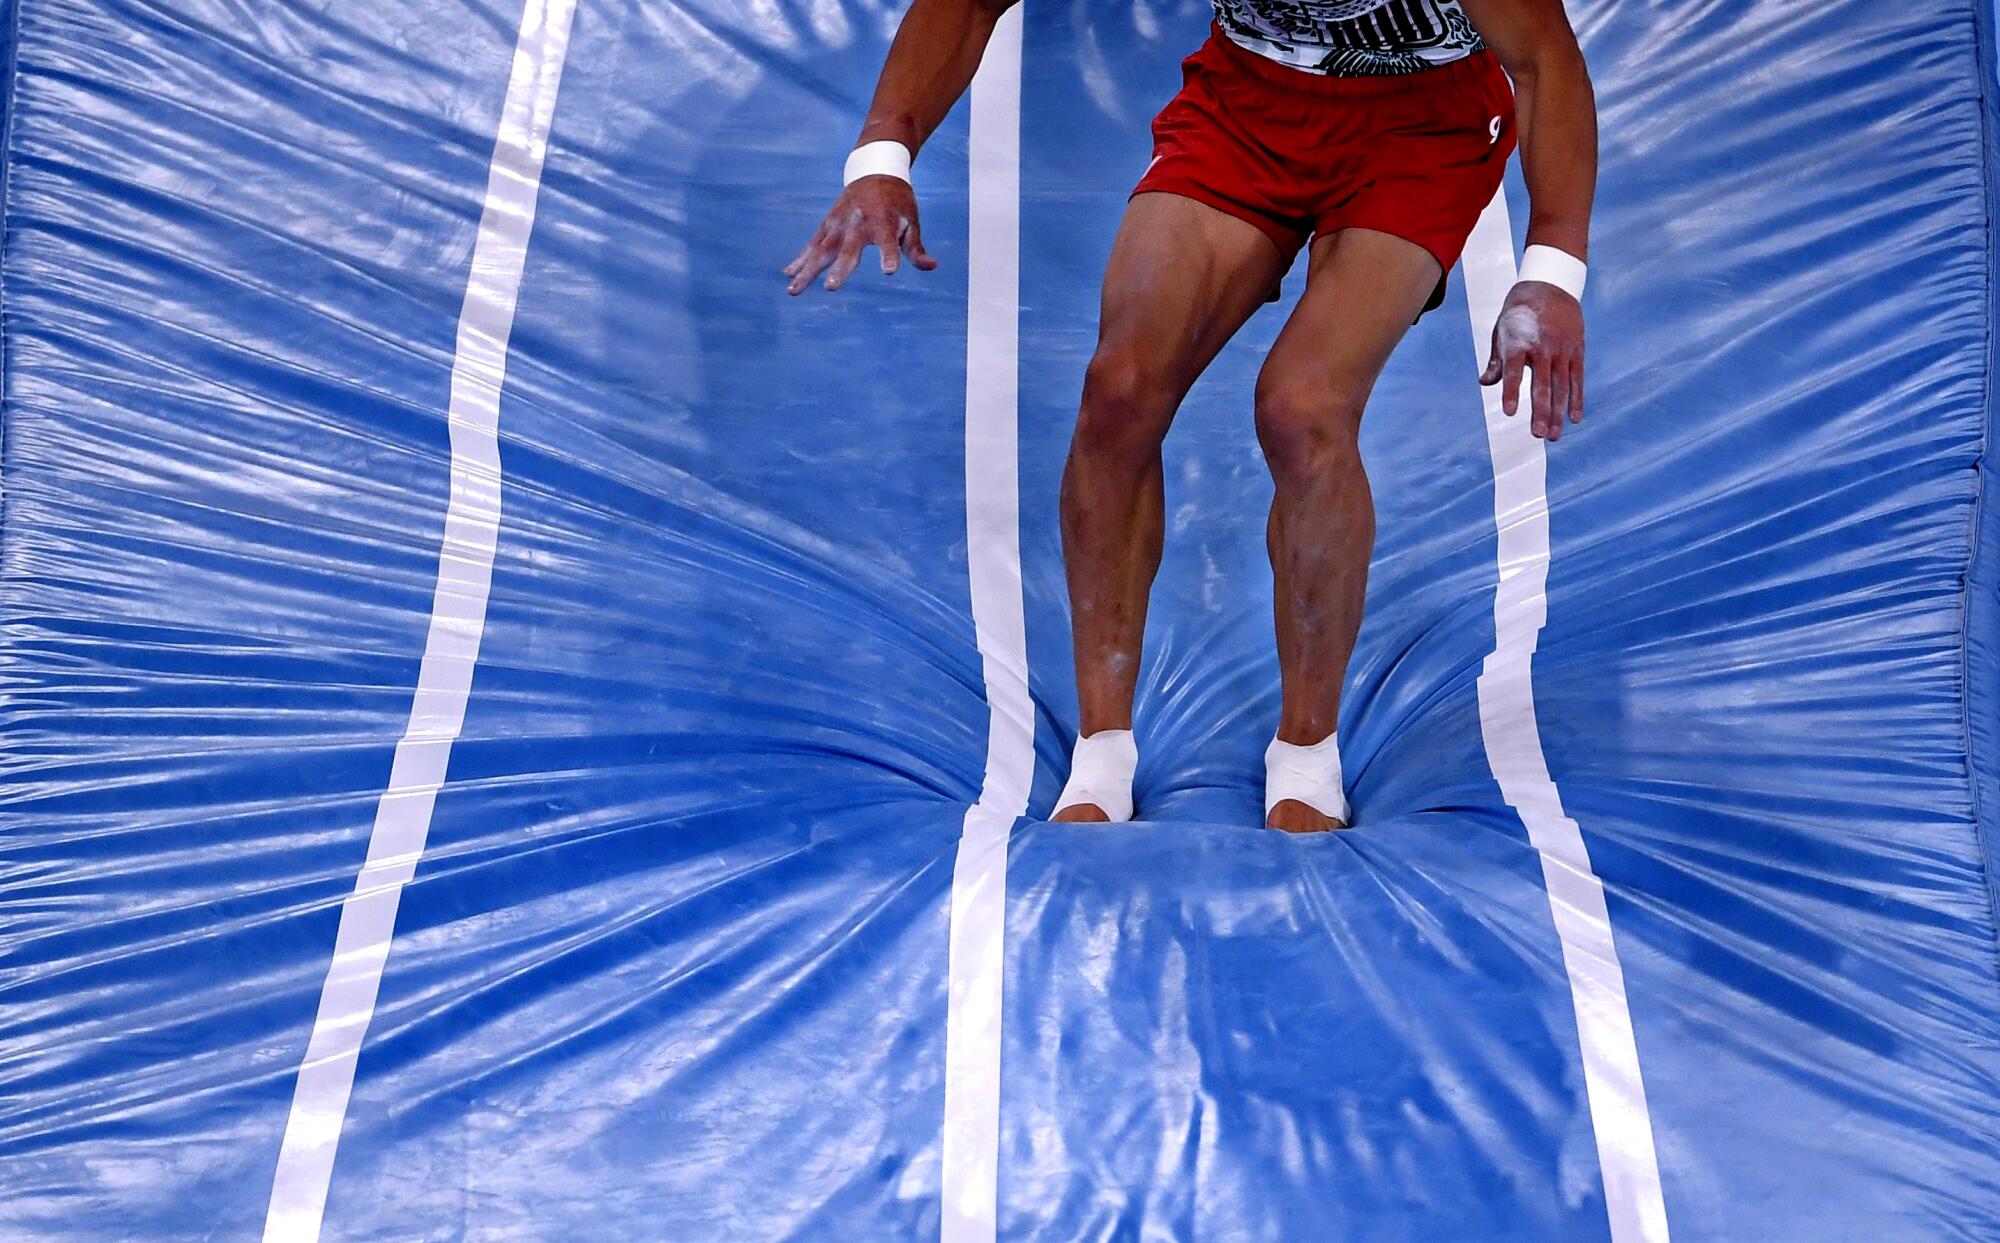 A closeup of a gymnast's lower half making a depression in a blue mat.